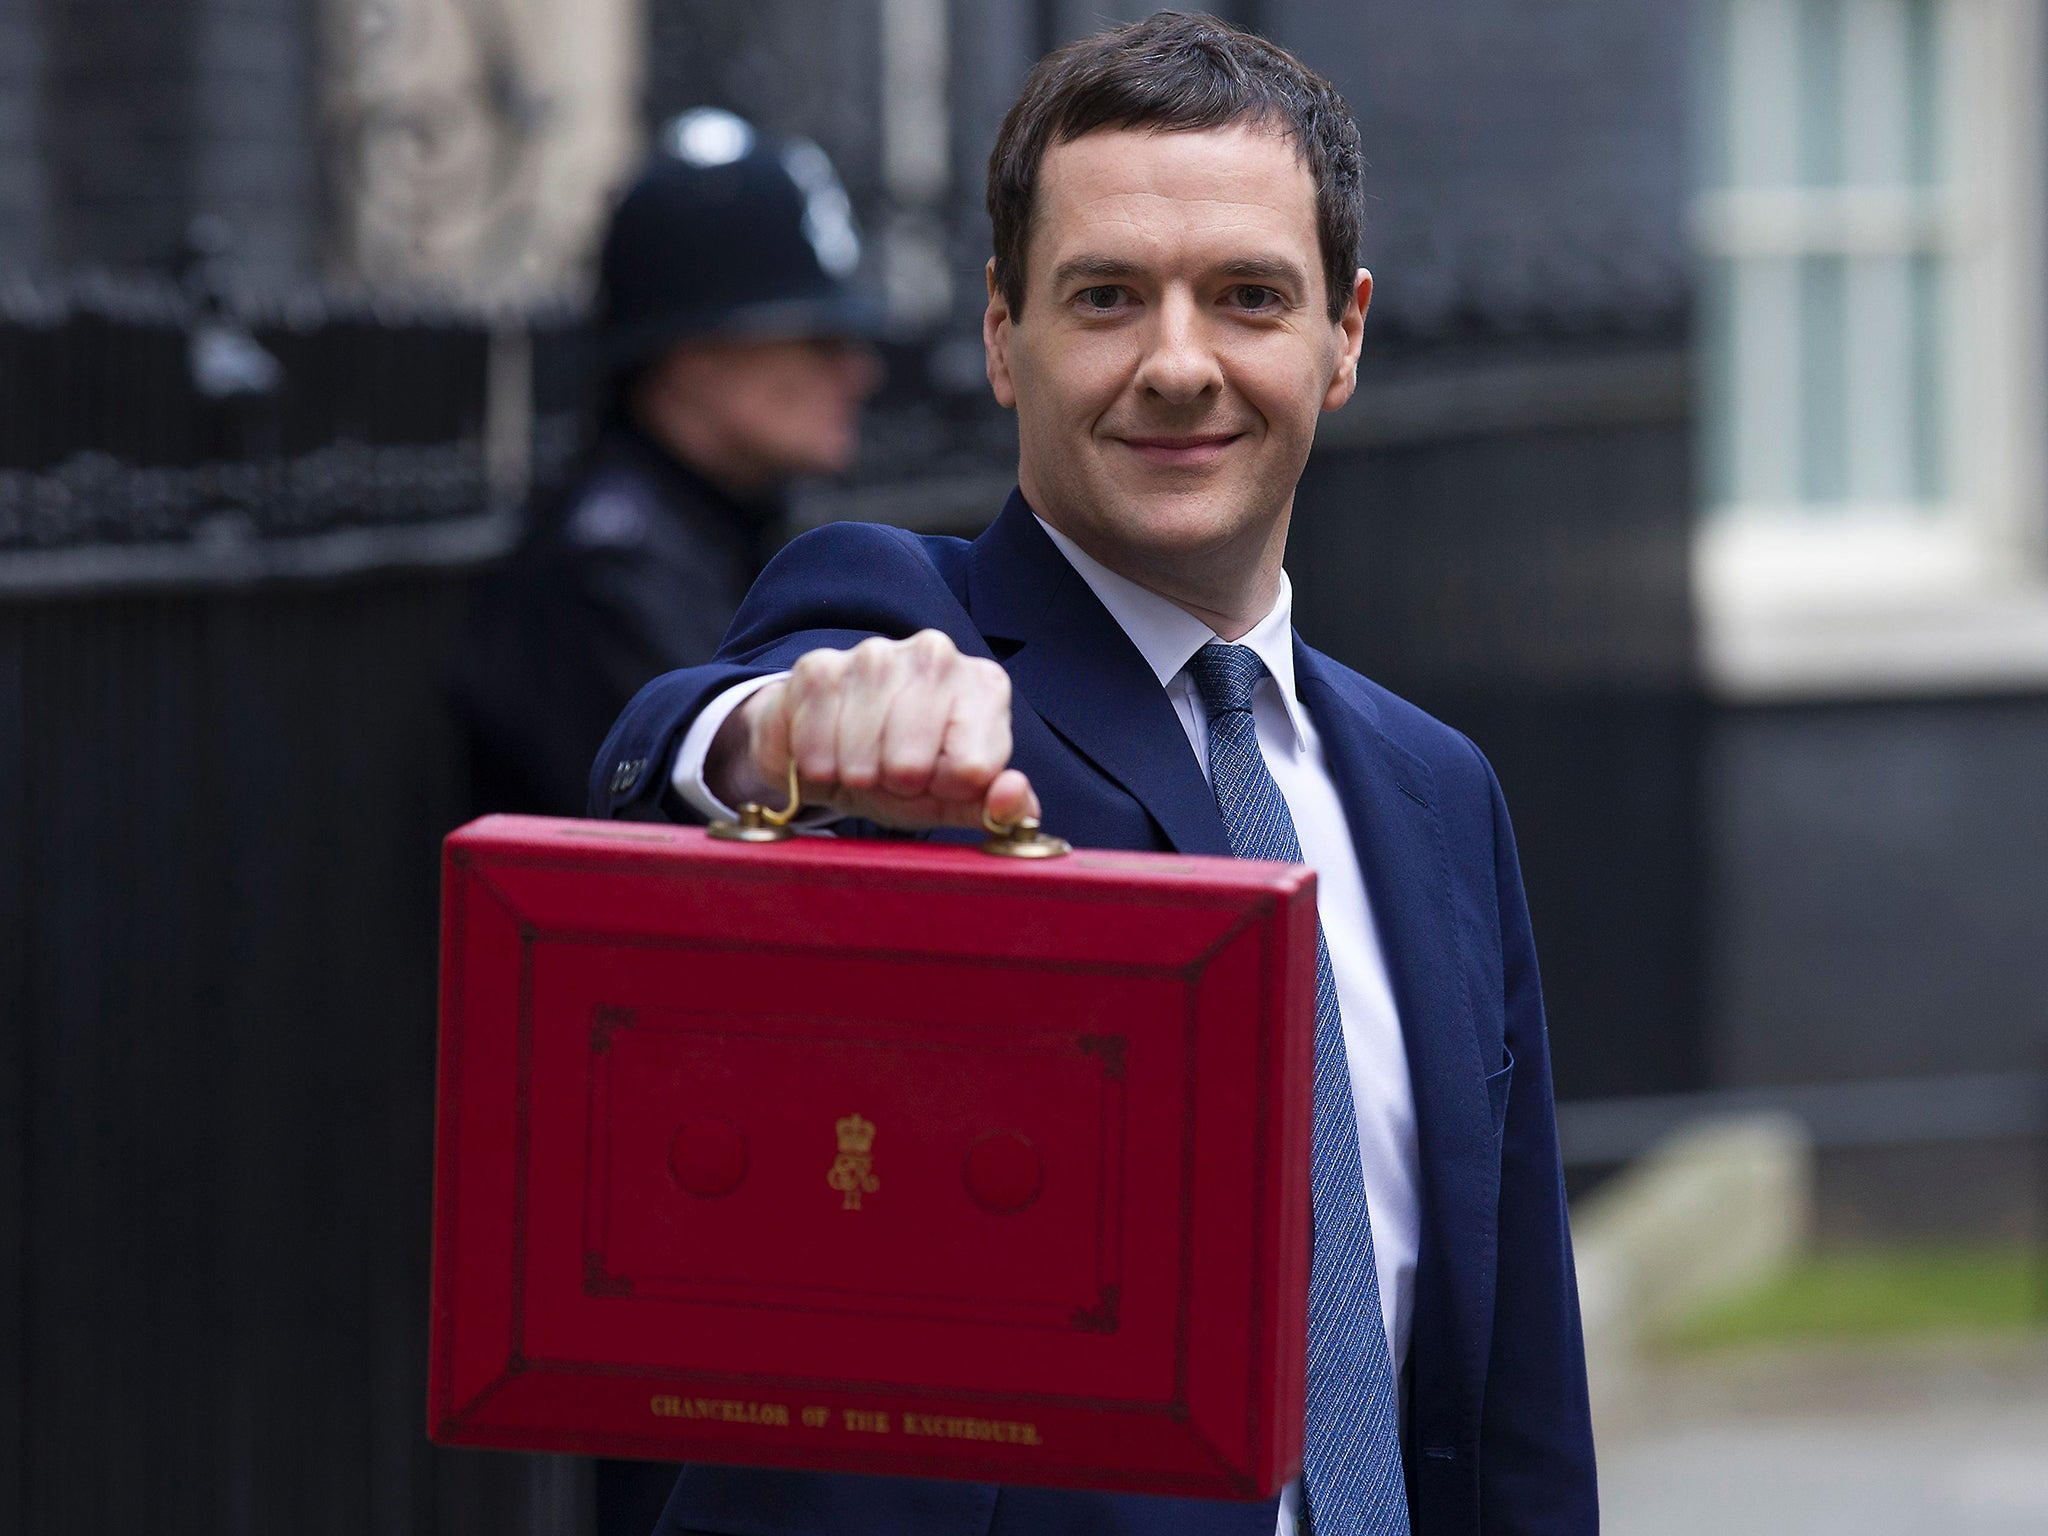 The cuts to Personal Independence Payments (PIP) were included in George Osborne’s Budget statement